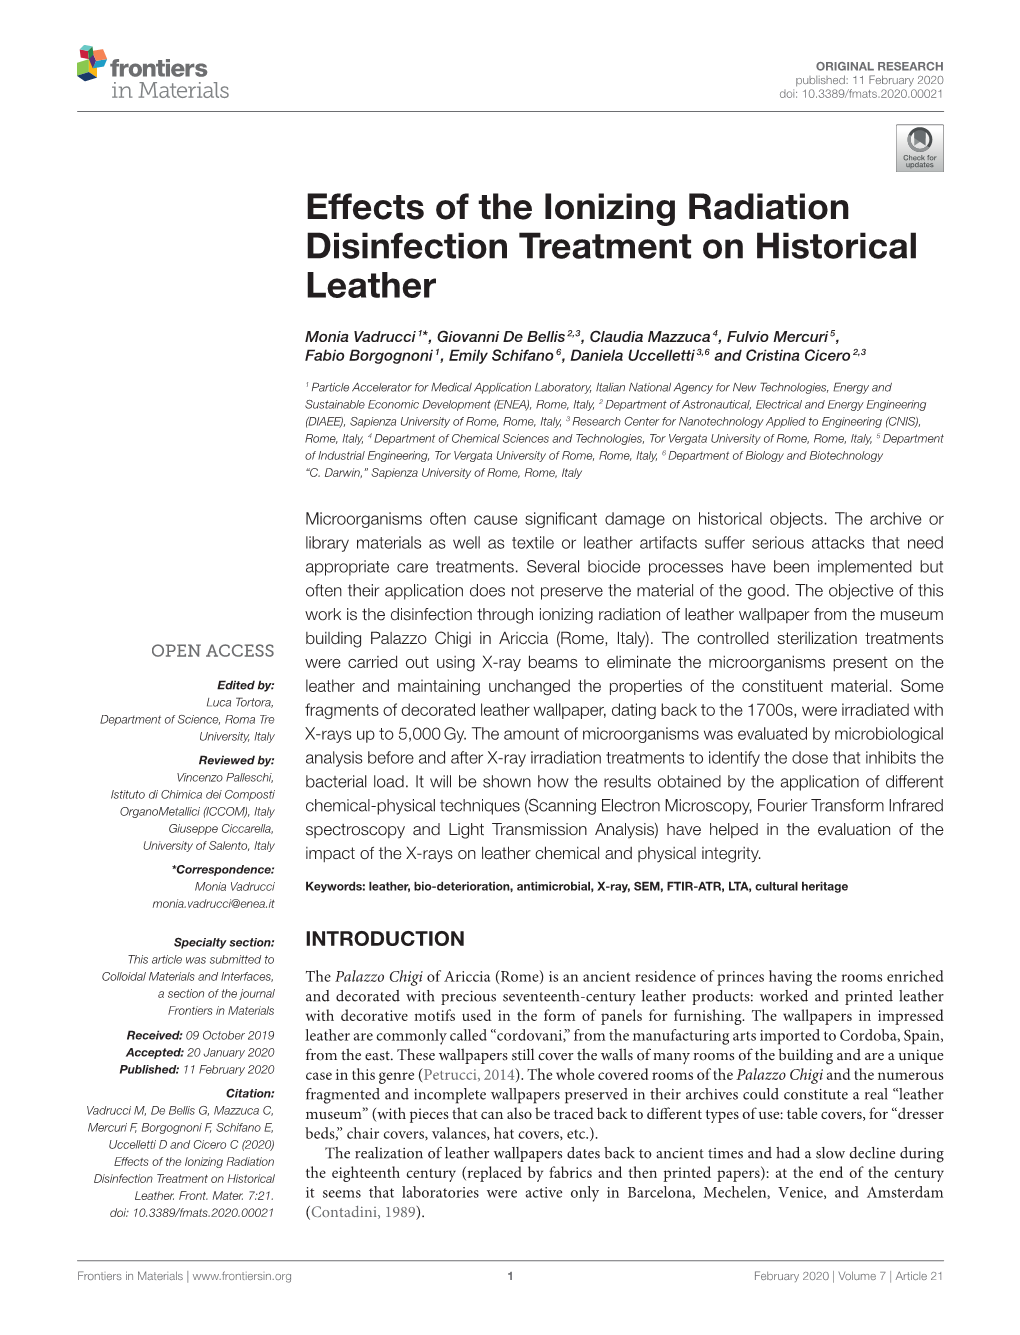 Effects of the Ionizing Radiation Disinfection Treatment on Historical Leather